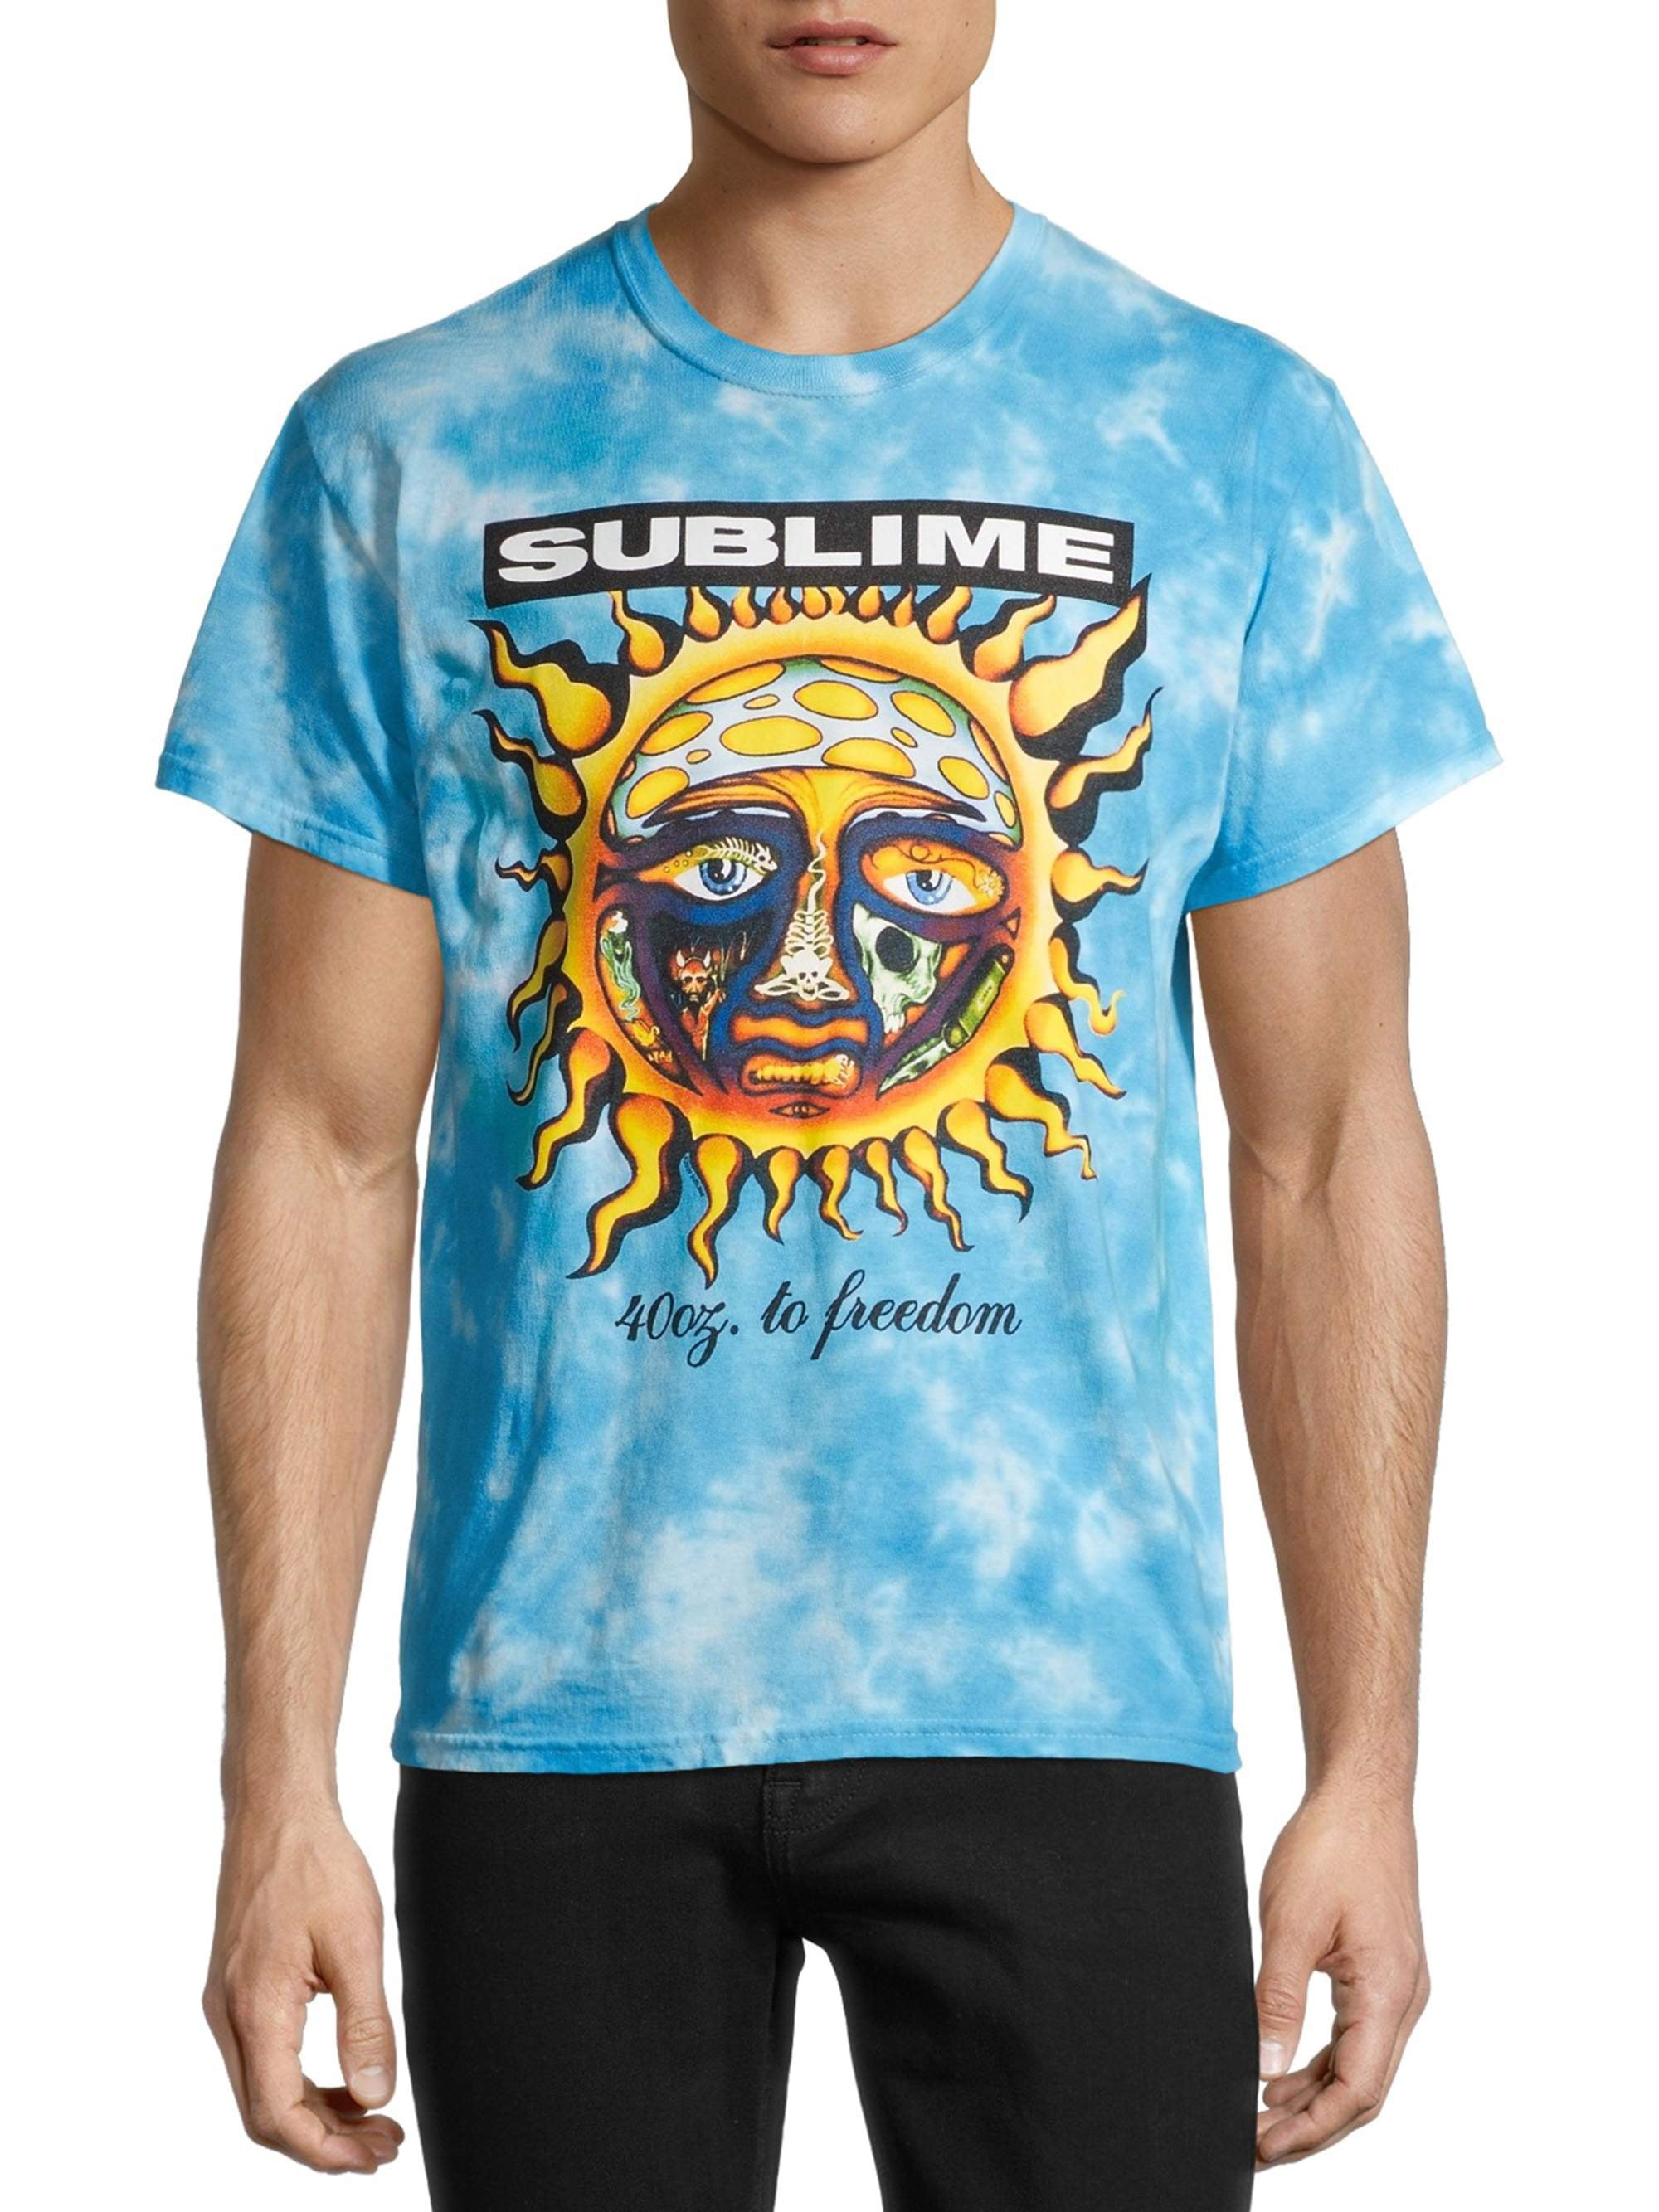 Sublime Short Sleeve Graphic Relaxed Fit T-Shirt (Men's or Men's Big &  Tall), 1 Pack 